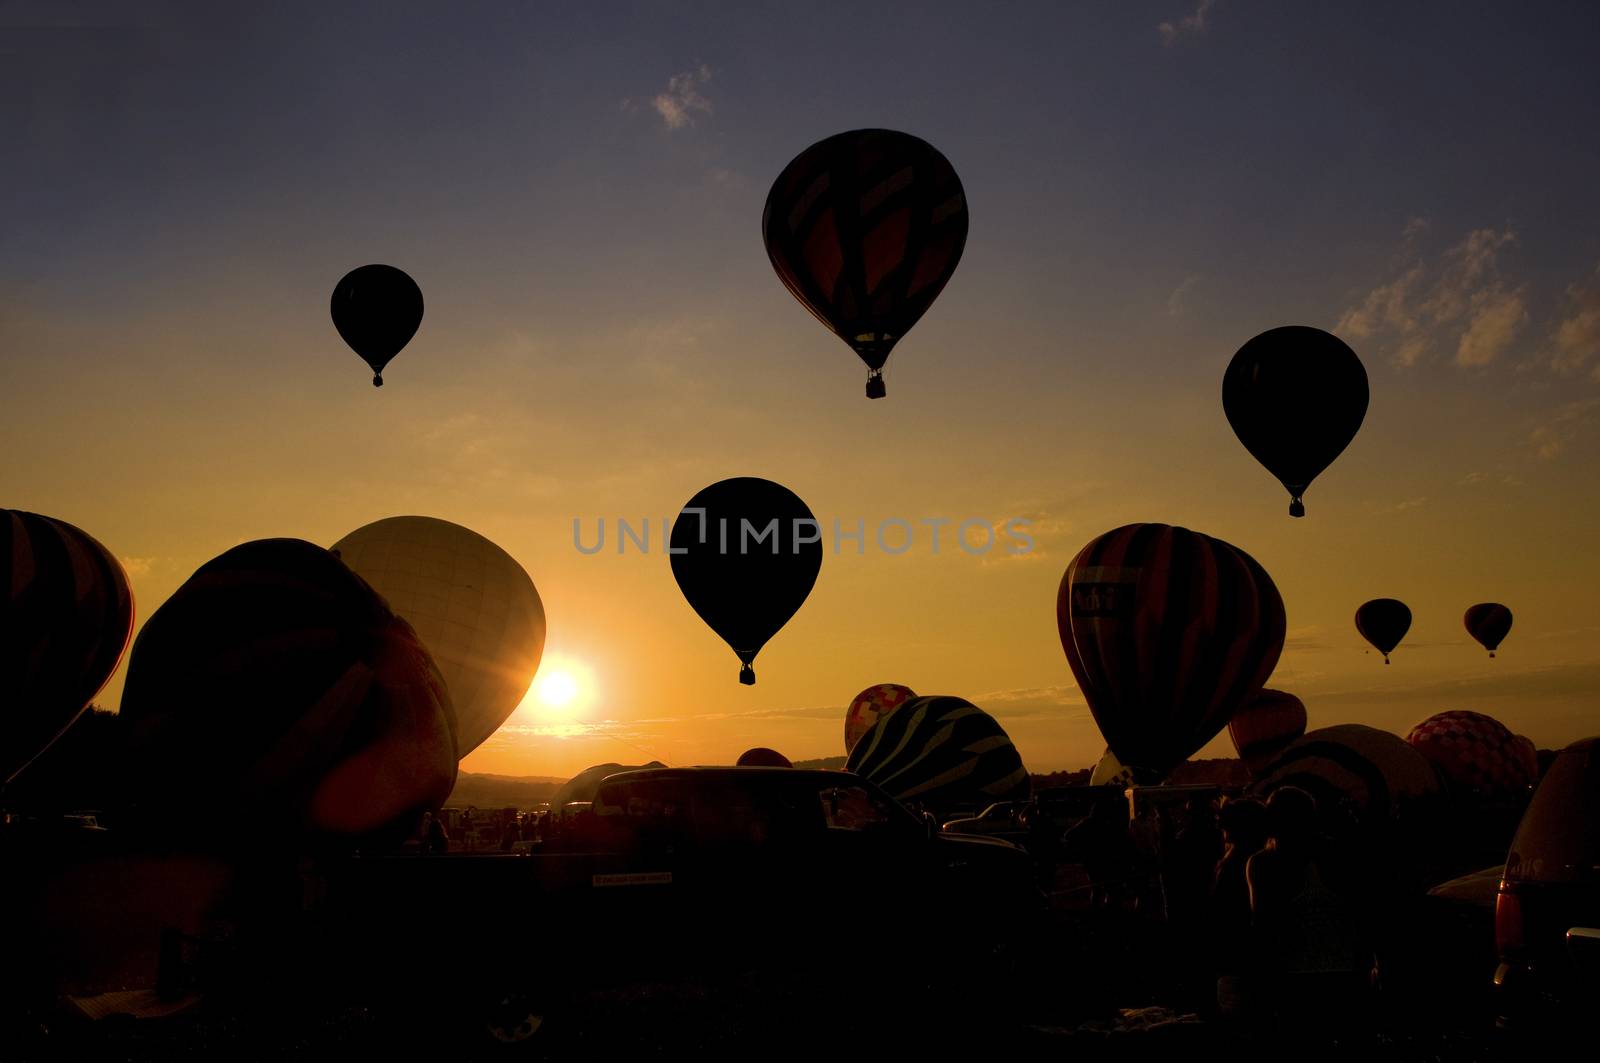 Group balloon launch at a balloon festival. by Balefire9